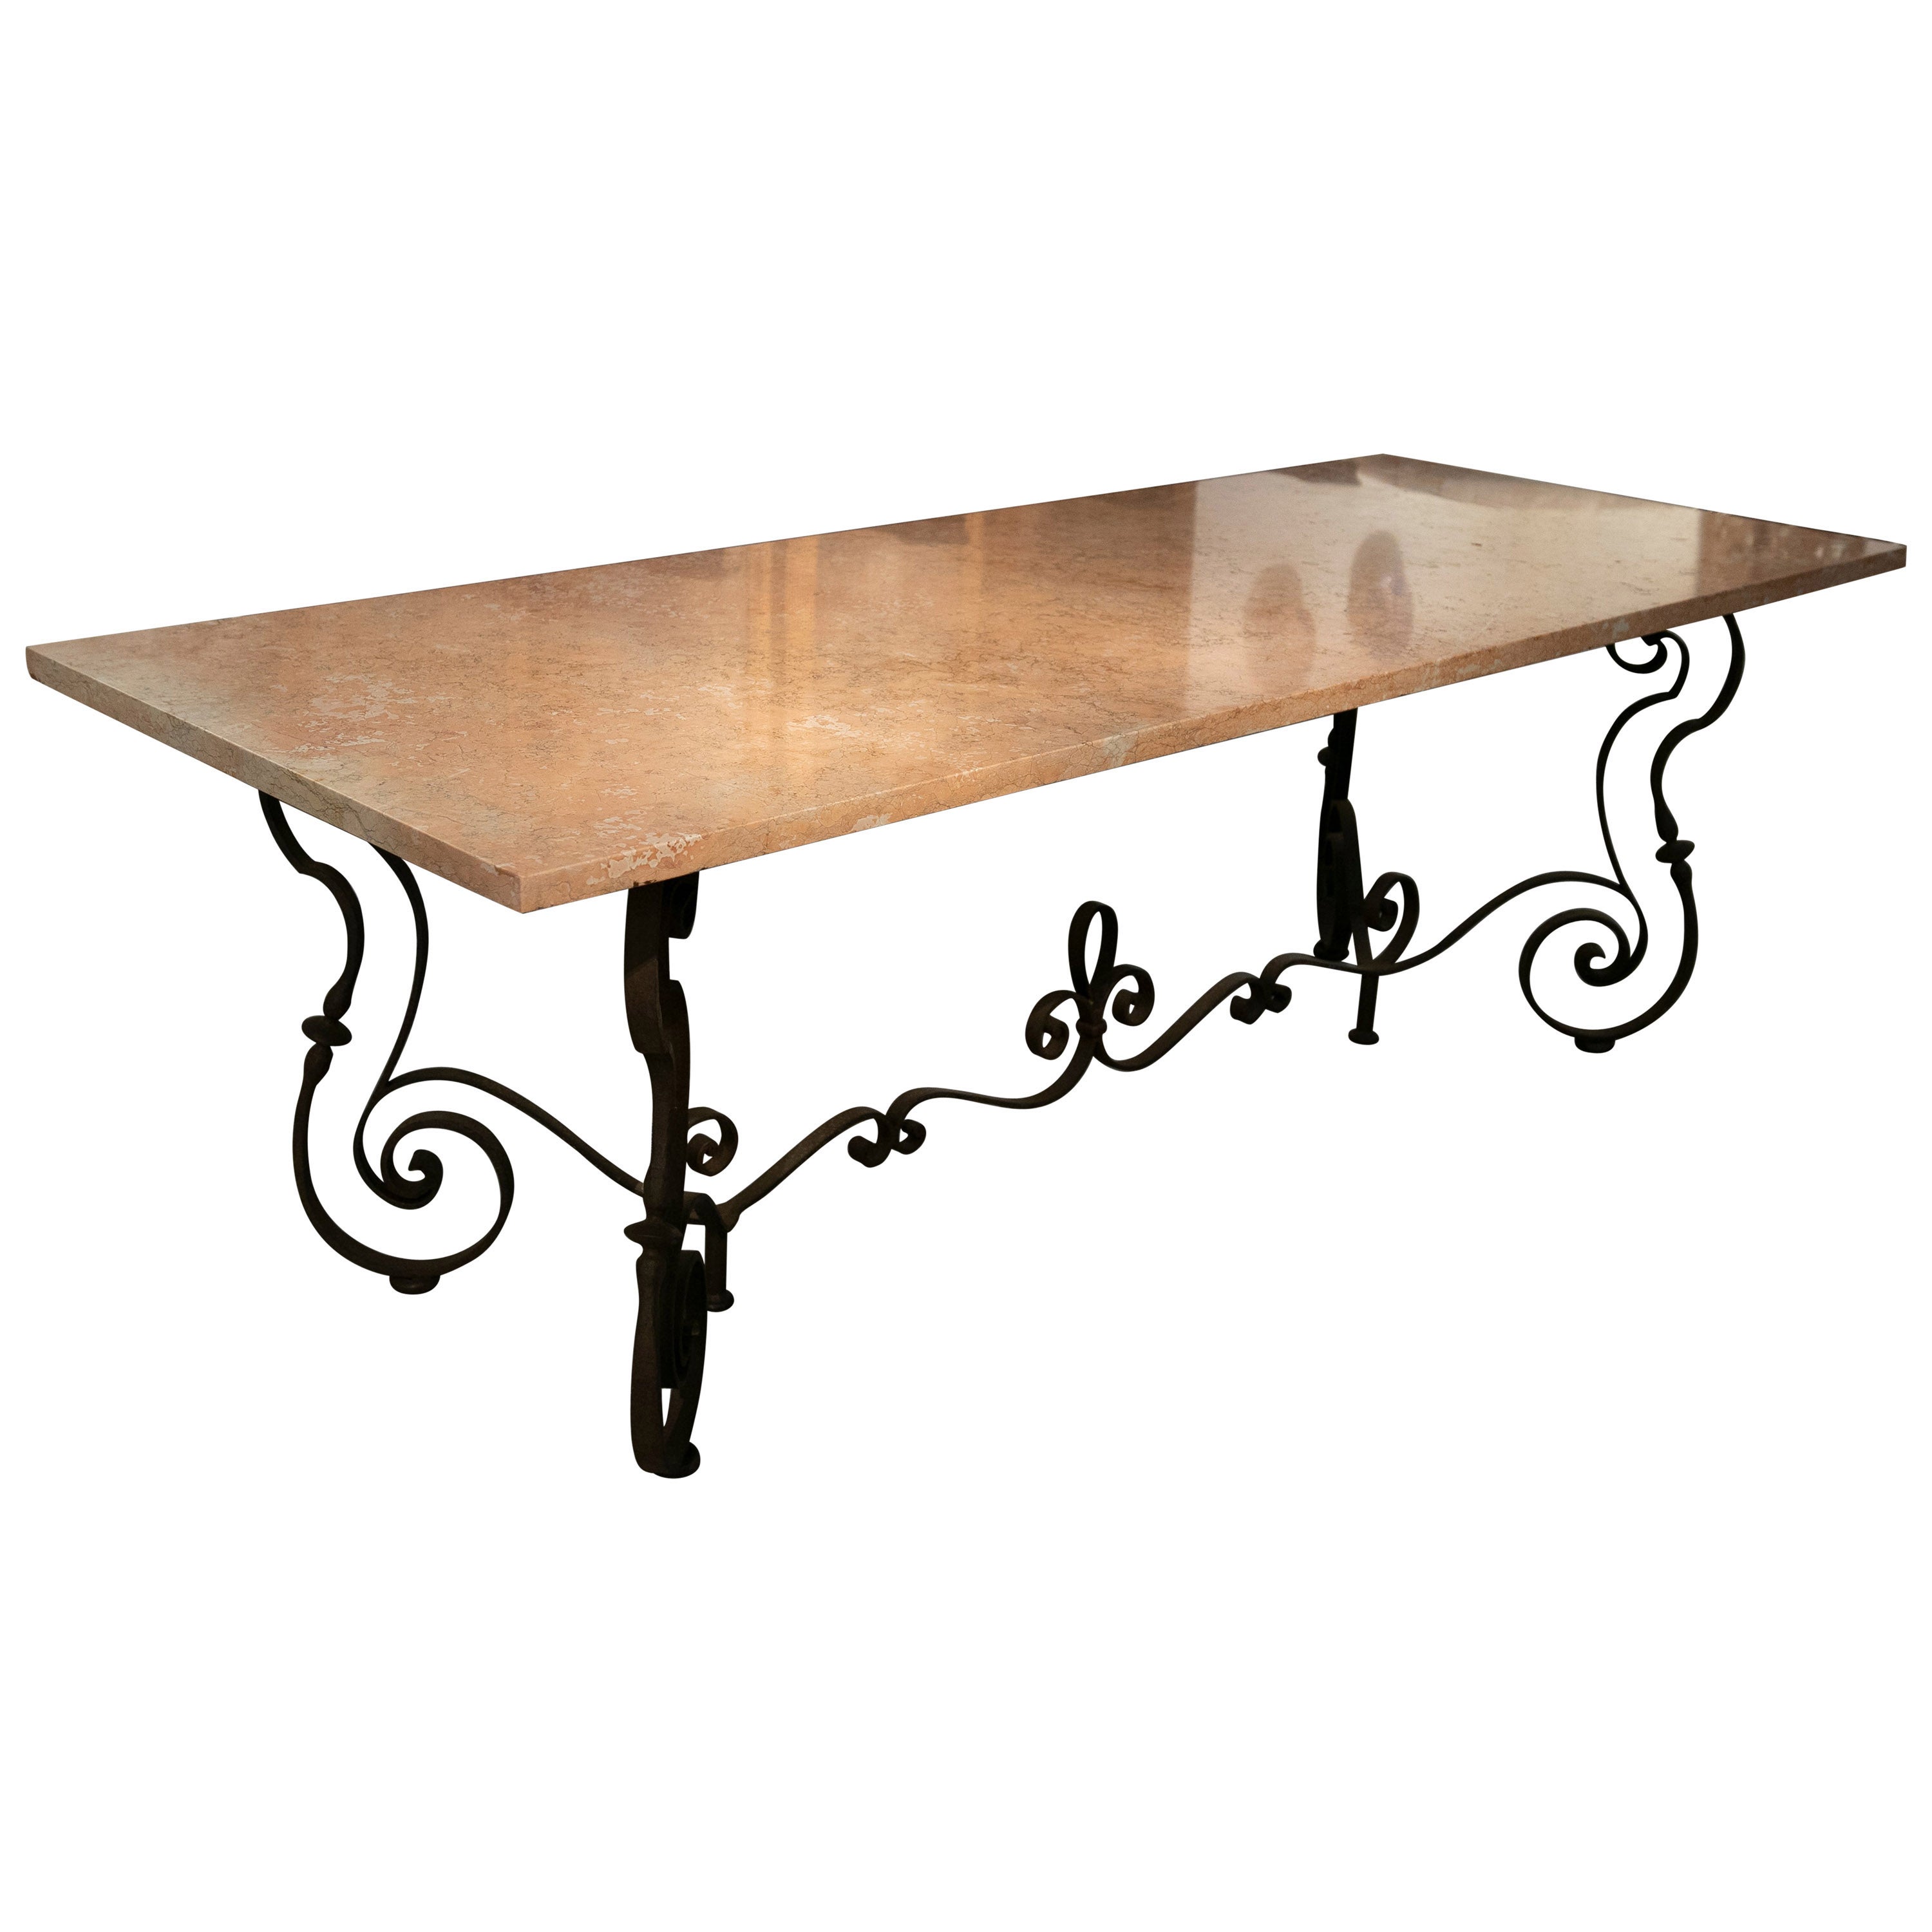 Italian Table with Iron Base and Rosseta Marble Top from Verona